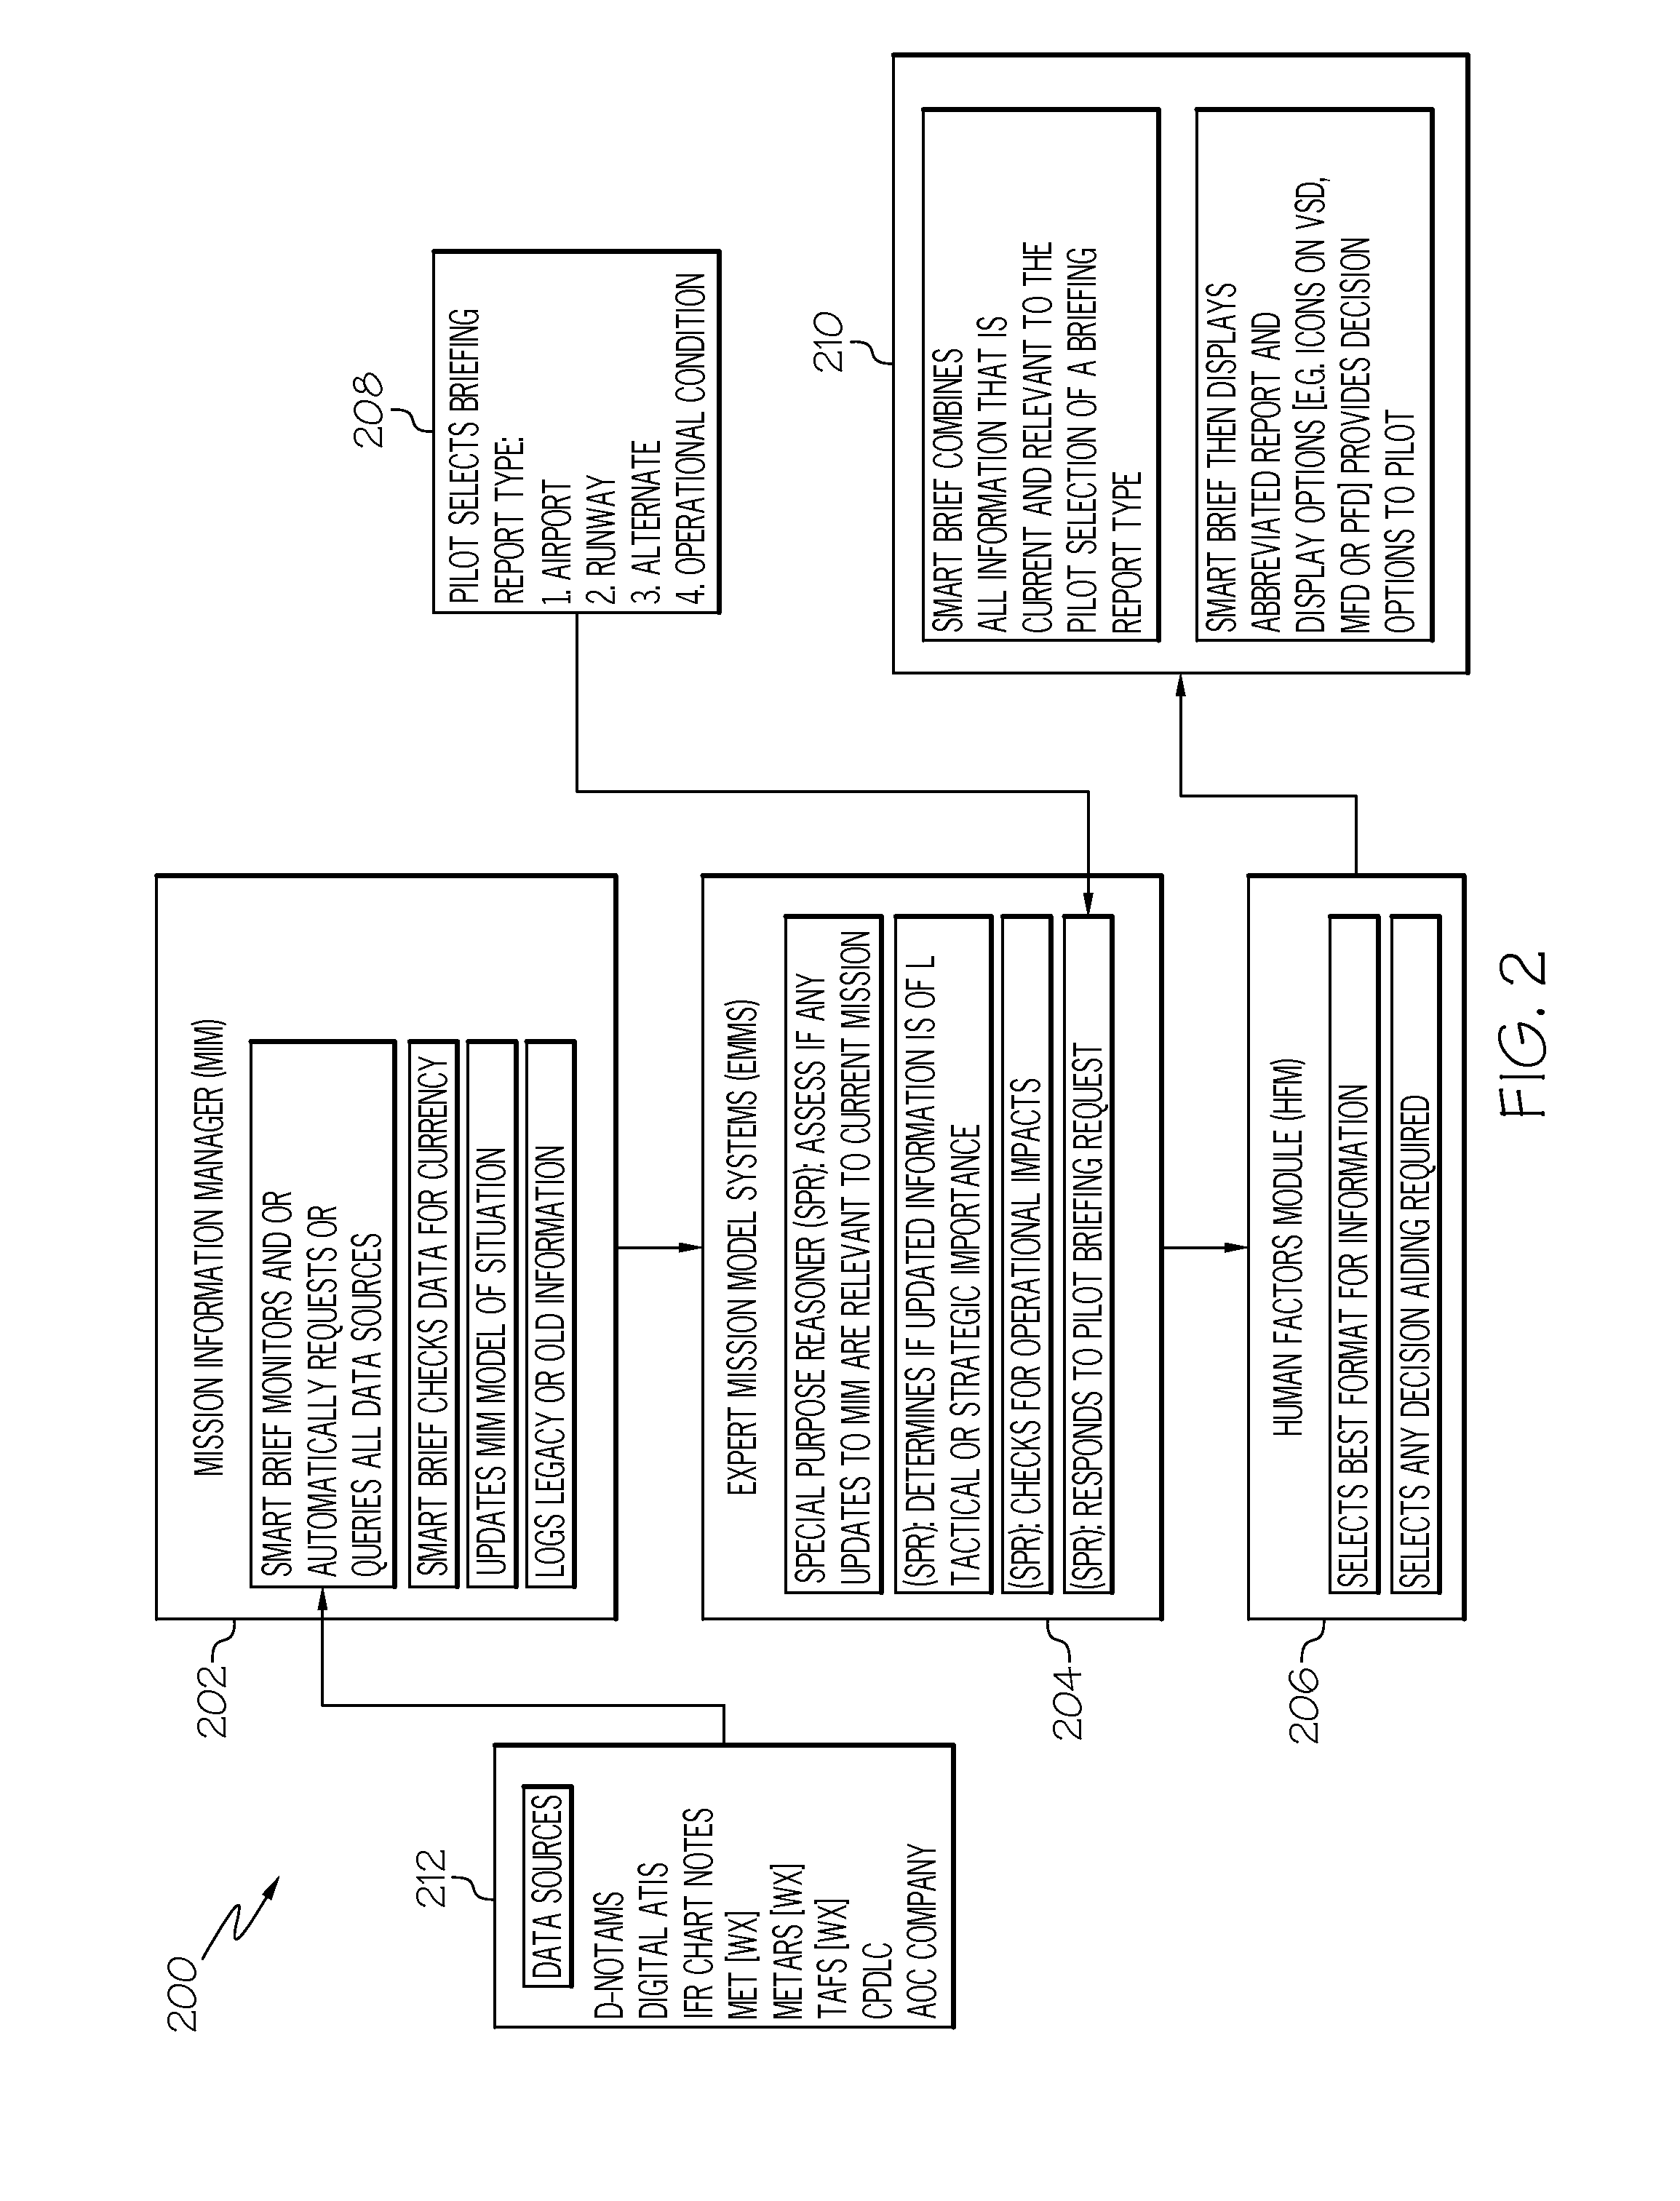 System and method for intelligently mining information and briefing an aircrew on conditions outside the aircraft